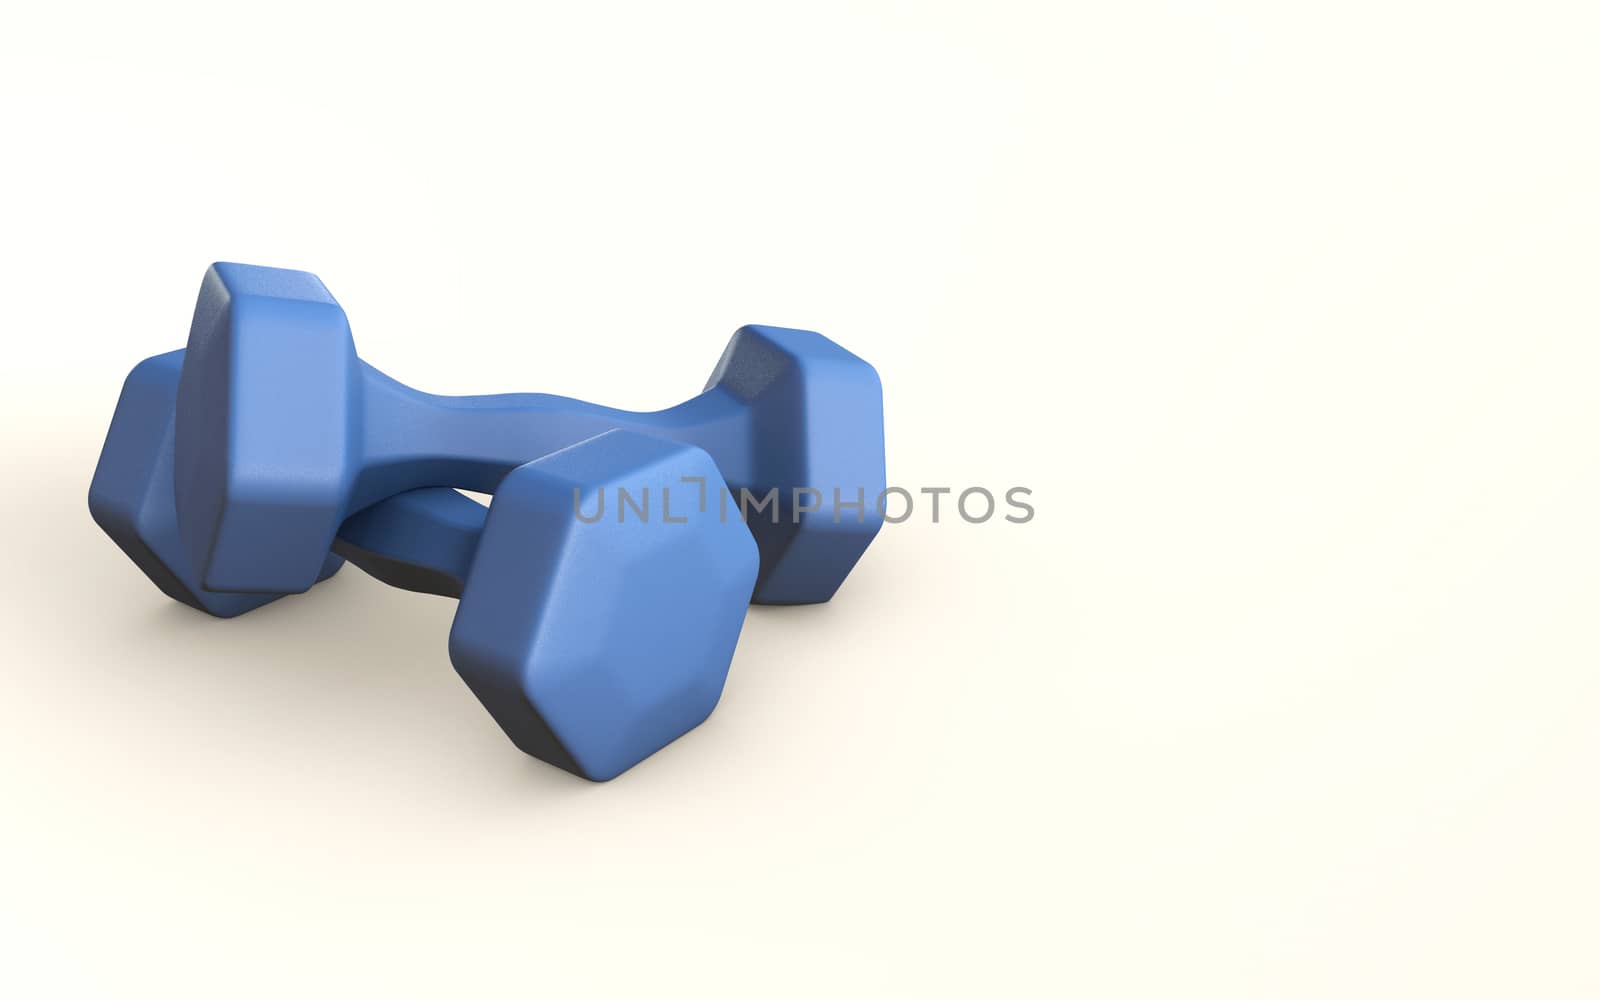 Blue Dumpel training fitness 3d rendered concept isolated on white by F1b0nacci